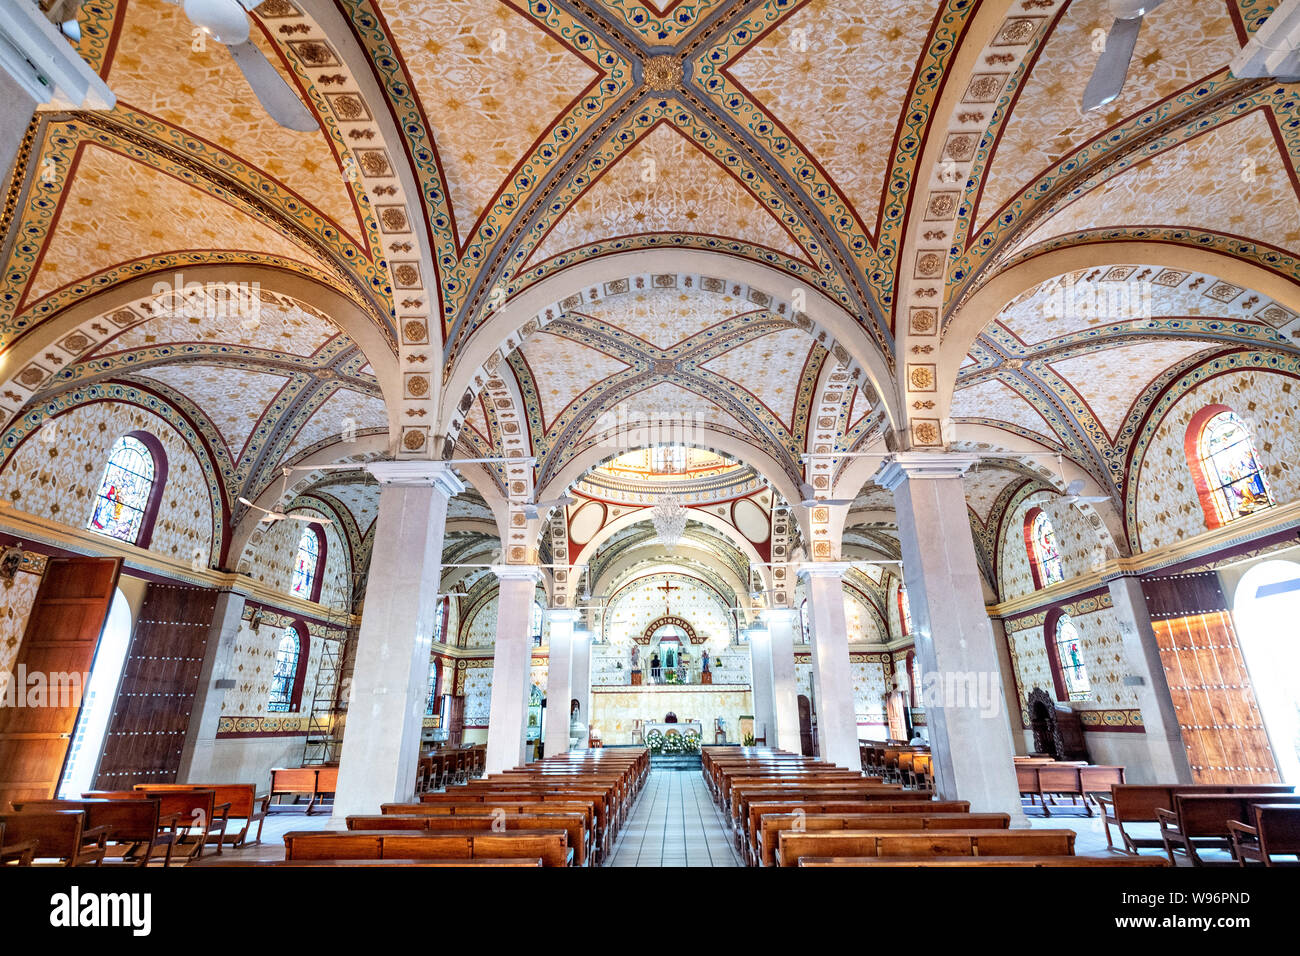 Interior view of the Basilica of Our Lady of Mount Carmel Catholic Church in Catemaco, Veracruz, Mexico. The town is built along a tropical freshwater lake at the center of the Sierra de Los Tuxtlas mountains, is a popular tourist destination and known for free ranging monkeys, the rainforest backdrop and Mexican witches known as Brujos. Stock Photo